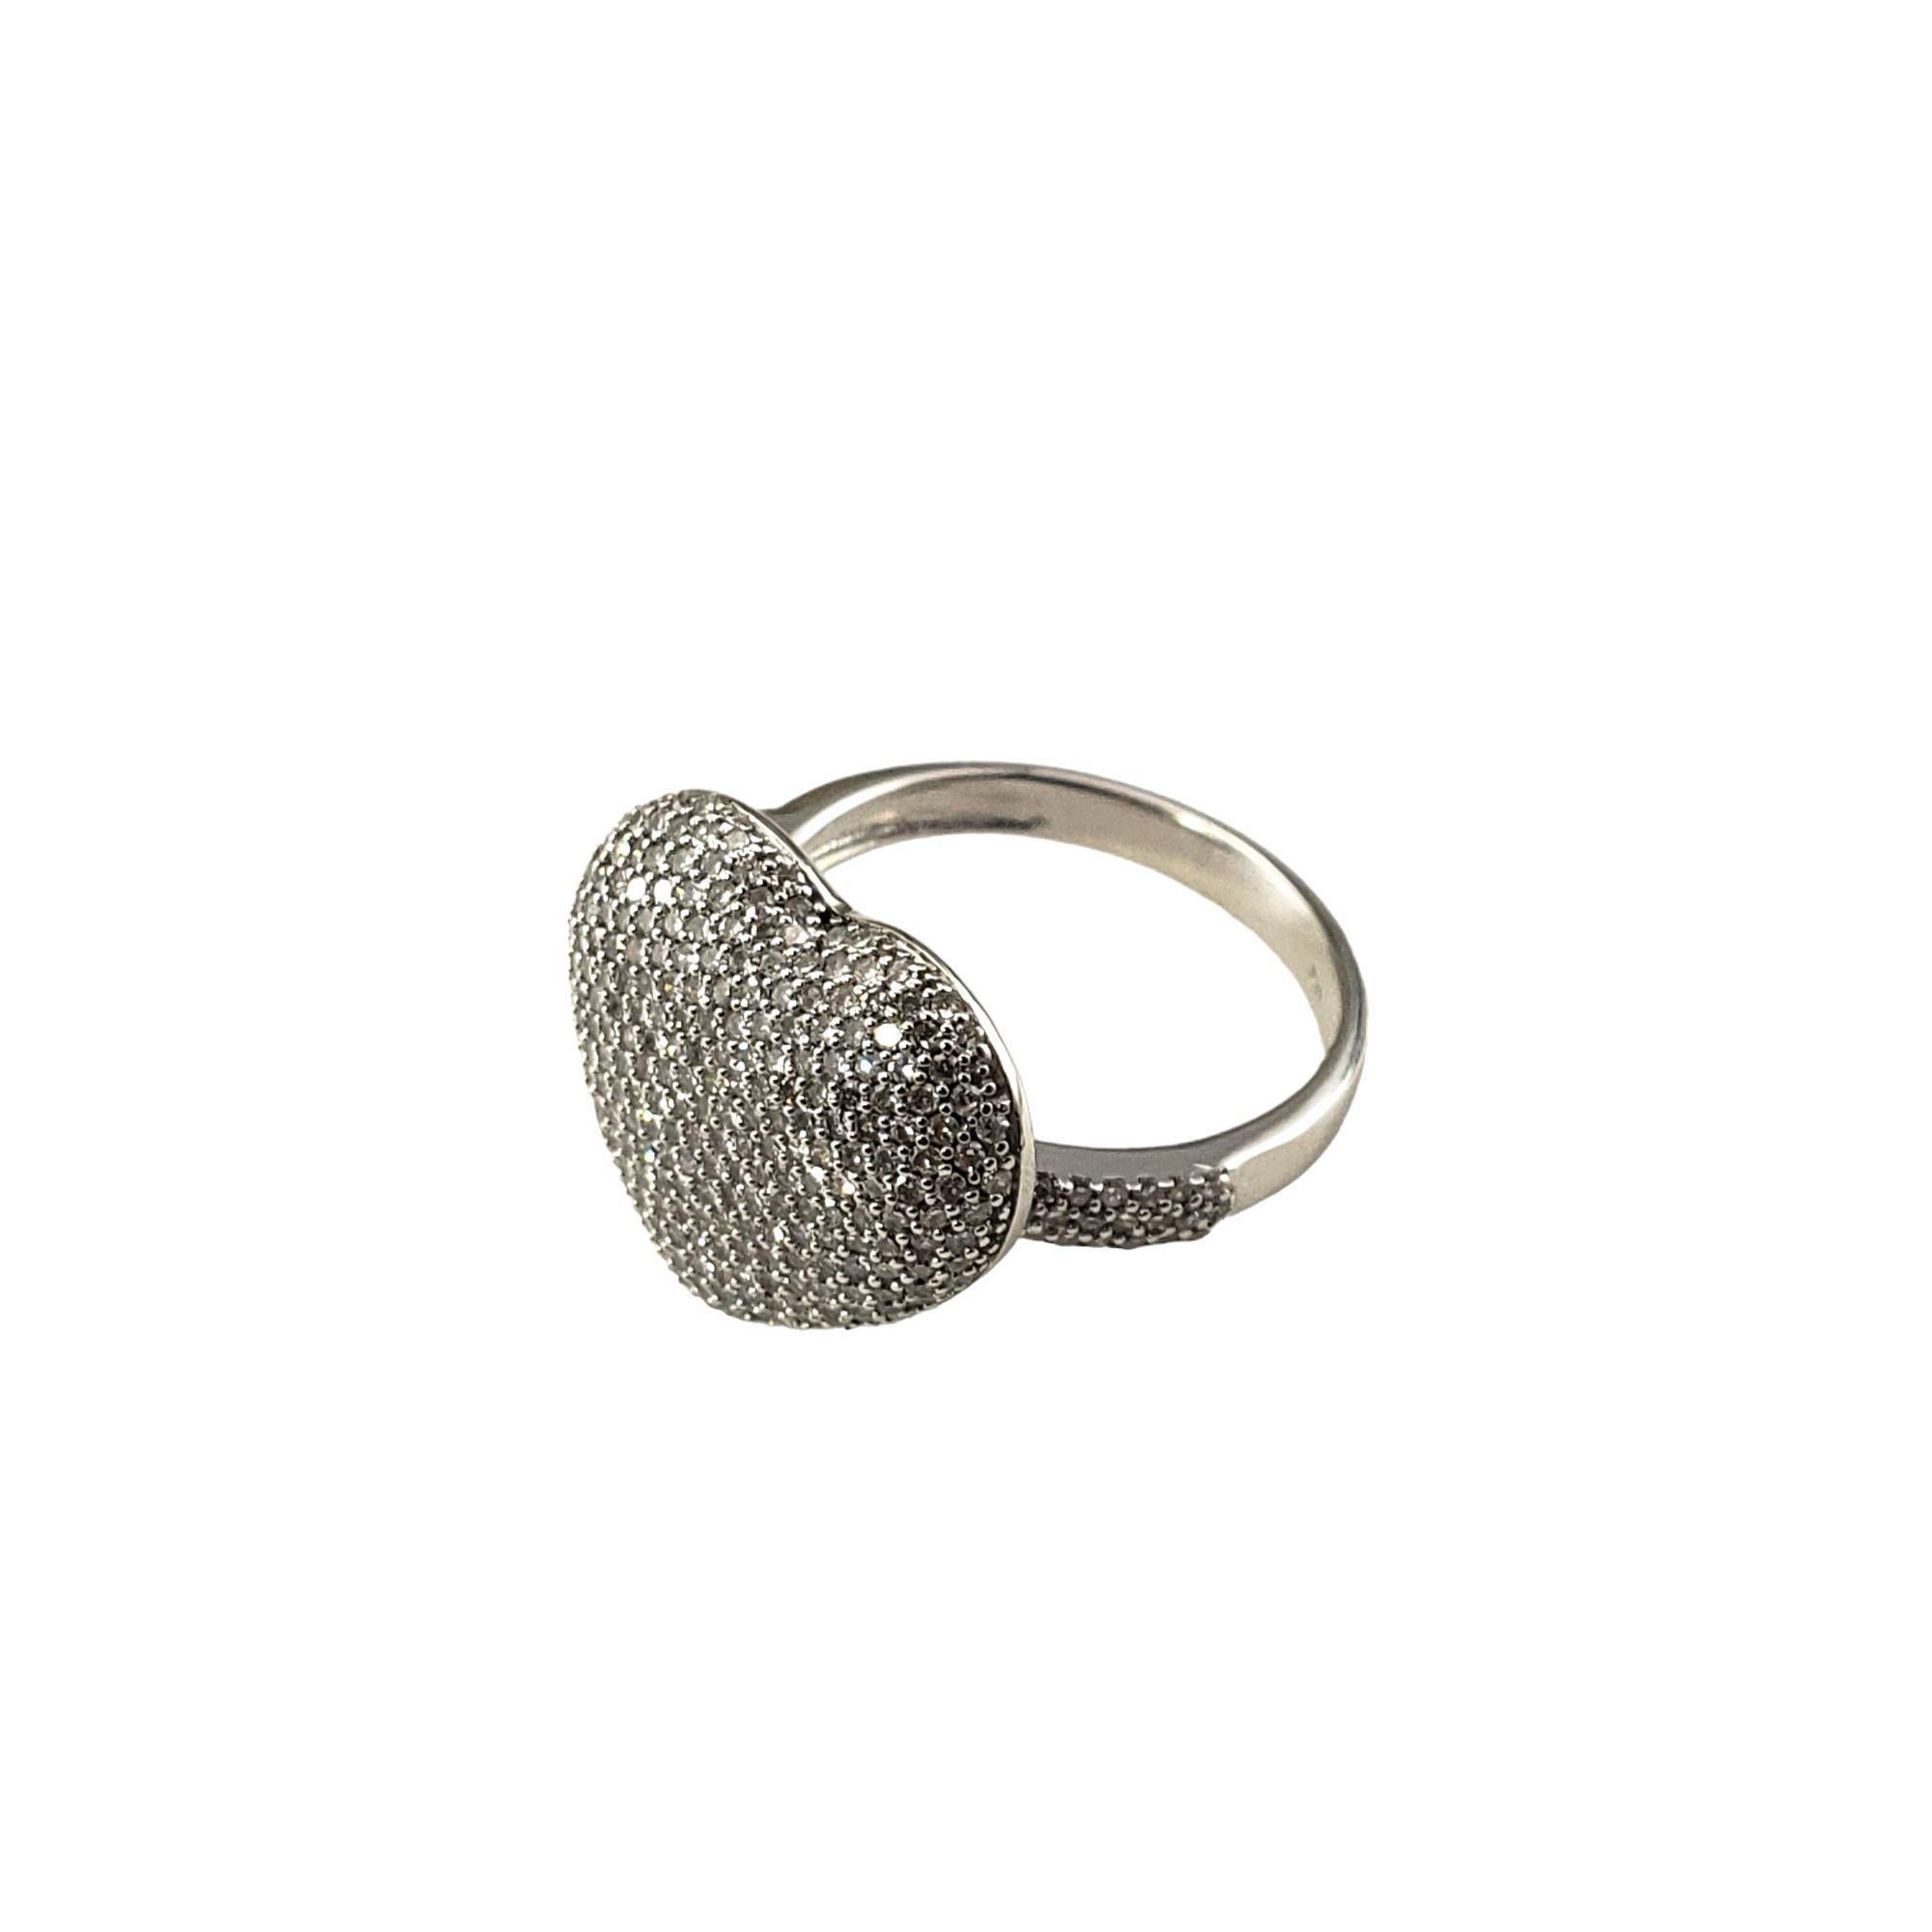 14 Karat White Gold and Diamond Heart Ring Size 7-

This sparkling heart ring features 282 round single cut diamonds set in beautifully detailed 14K white gold. Width: 15 mm. Shank: 2.7 mm.

Approximate total diamond weight: 1.25 ct.

Diamond